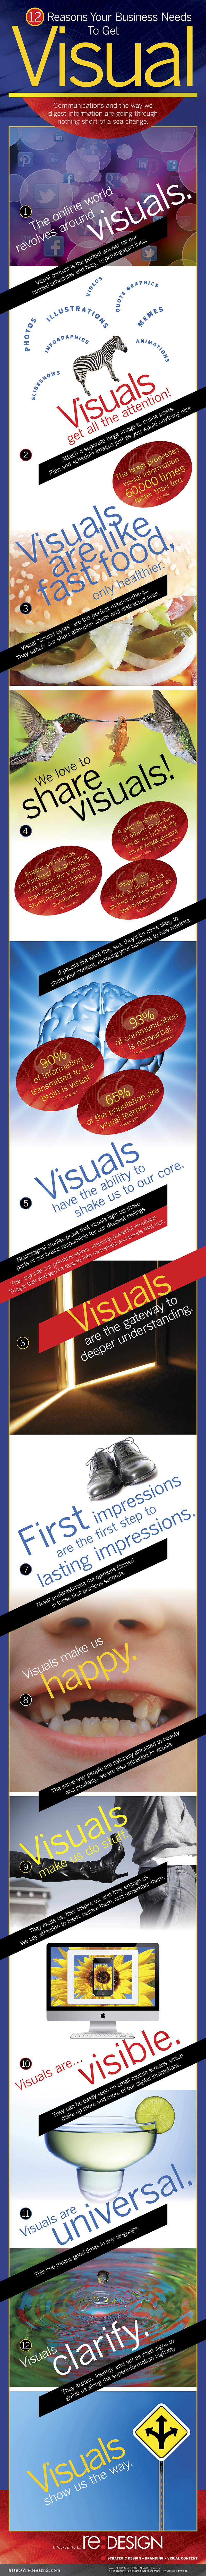 12 Reasons Your Business Needs to Get Visual infographic